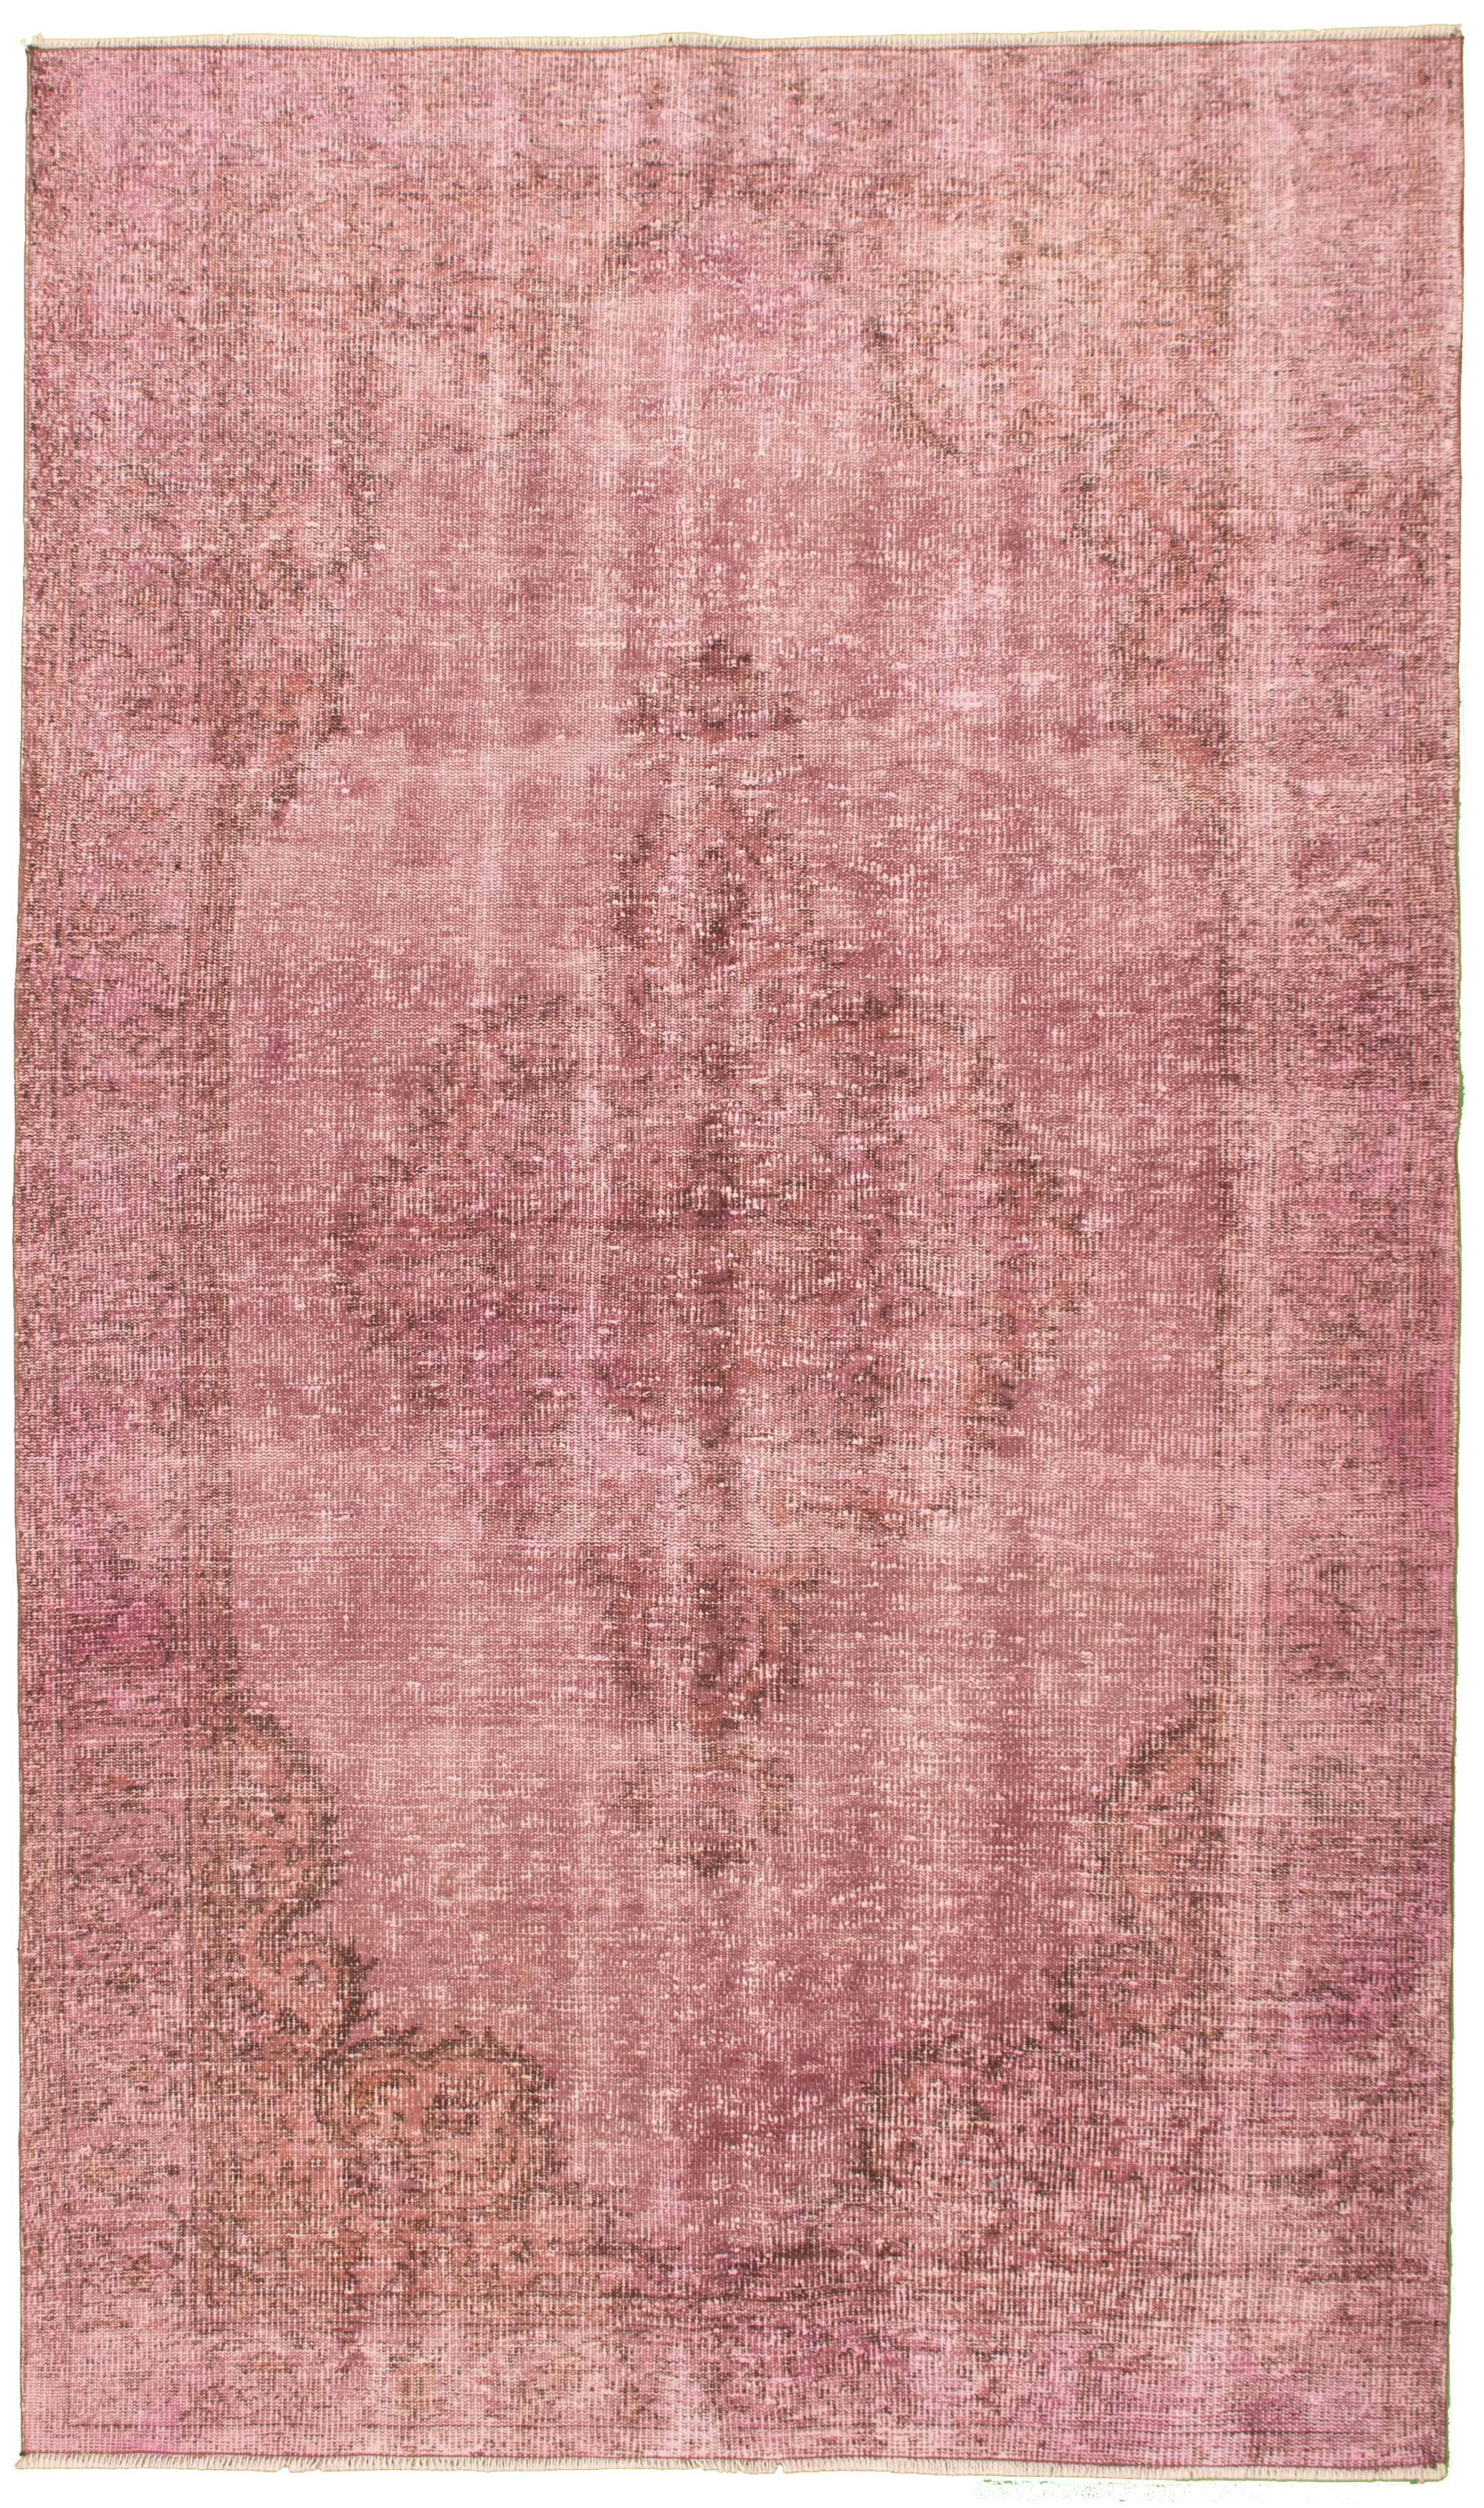 Hand-knotted Color Transition Violet Wool Rug 5'2" x 8'9" Size: 5'2" x 8'9"  